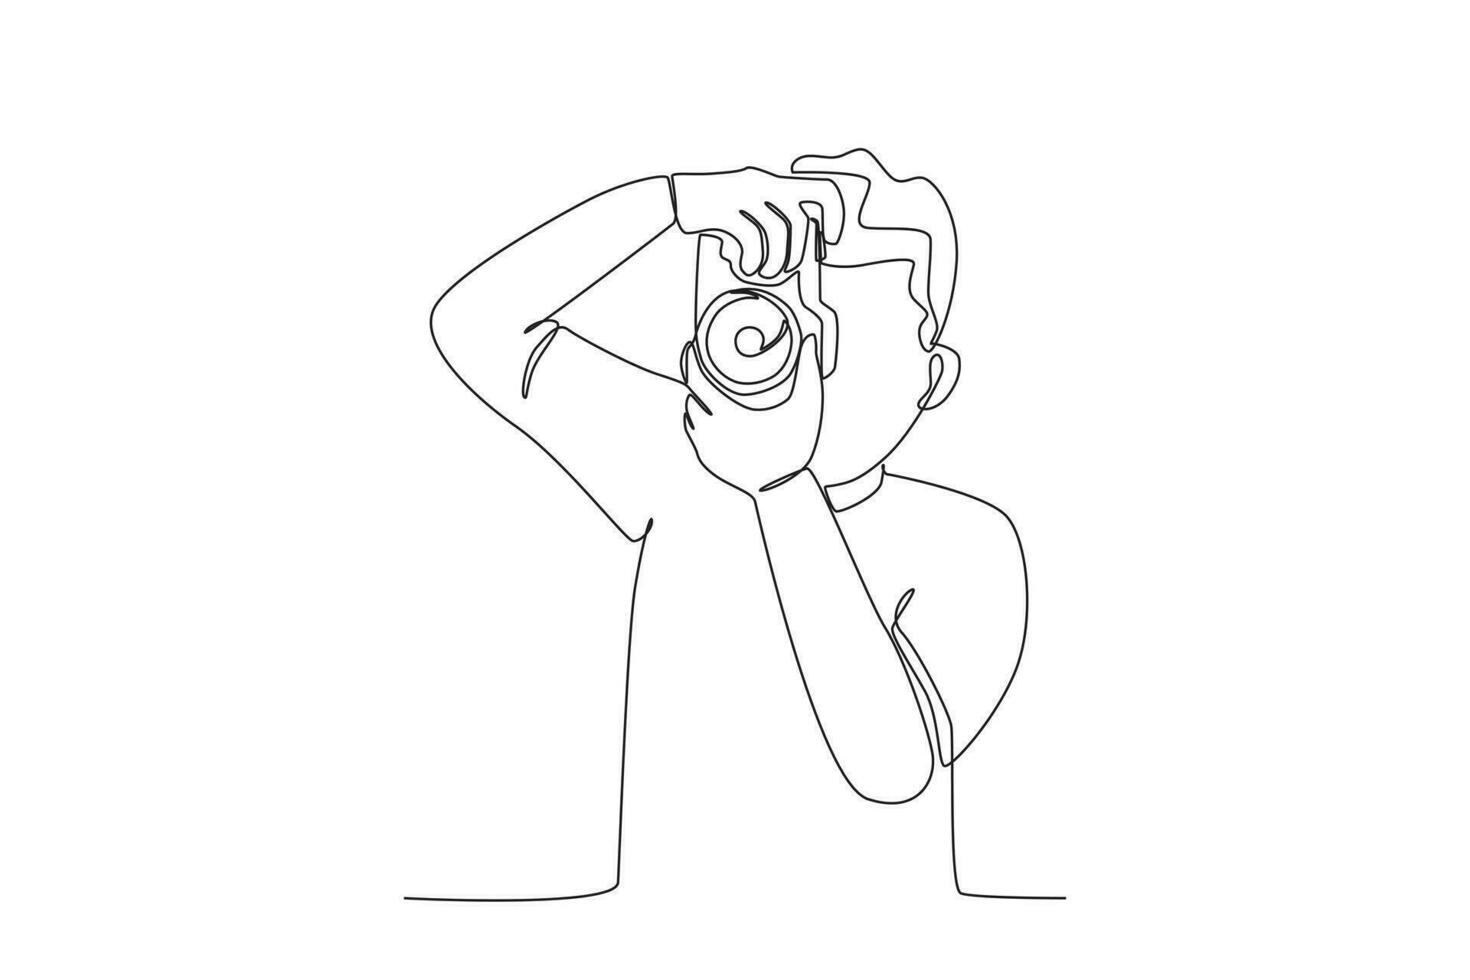 A child taking pictures vector